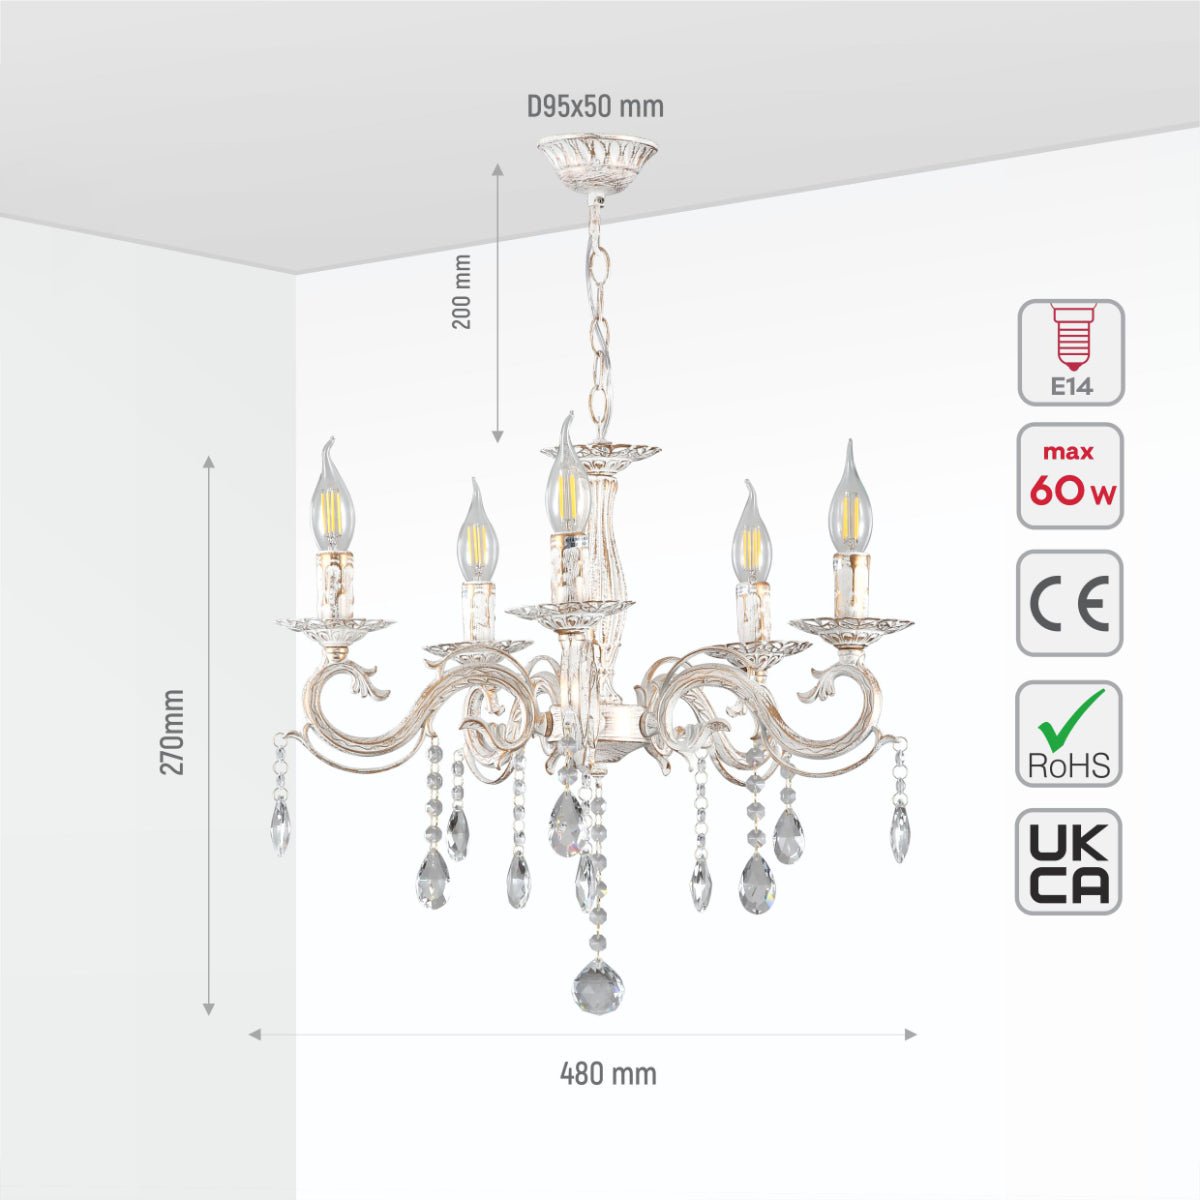 Size and specs of Candle Waterfall Traditional Retro Vintage 5 Arm Chandelier Ceiling Light Crystal Gold Aged Cream 5xE14 | TEKLED 159-17824